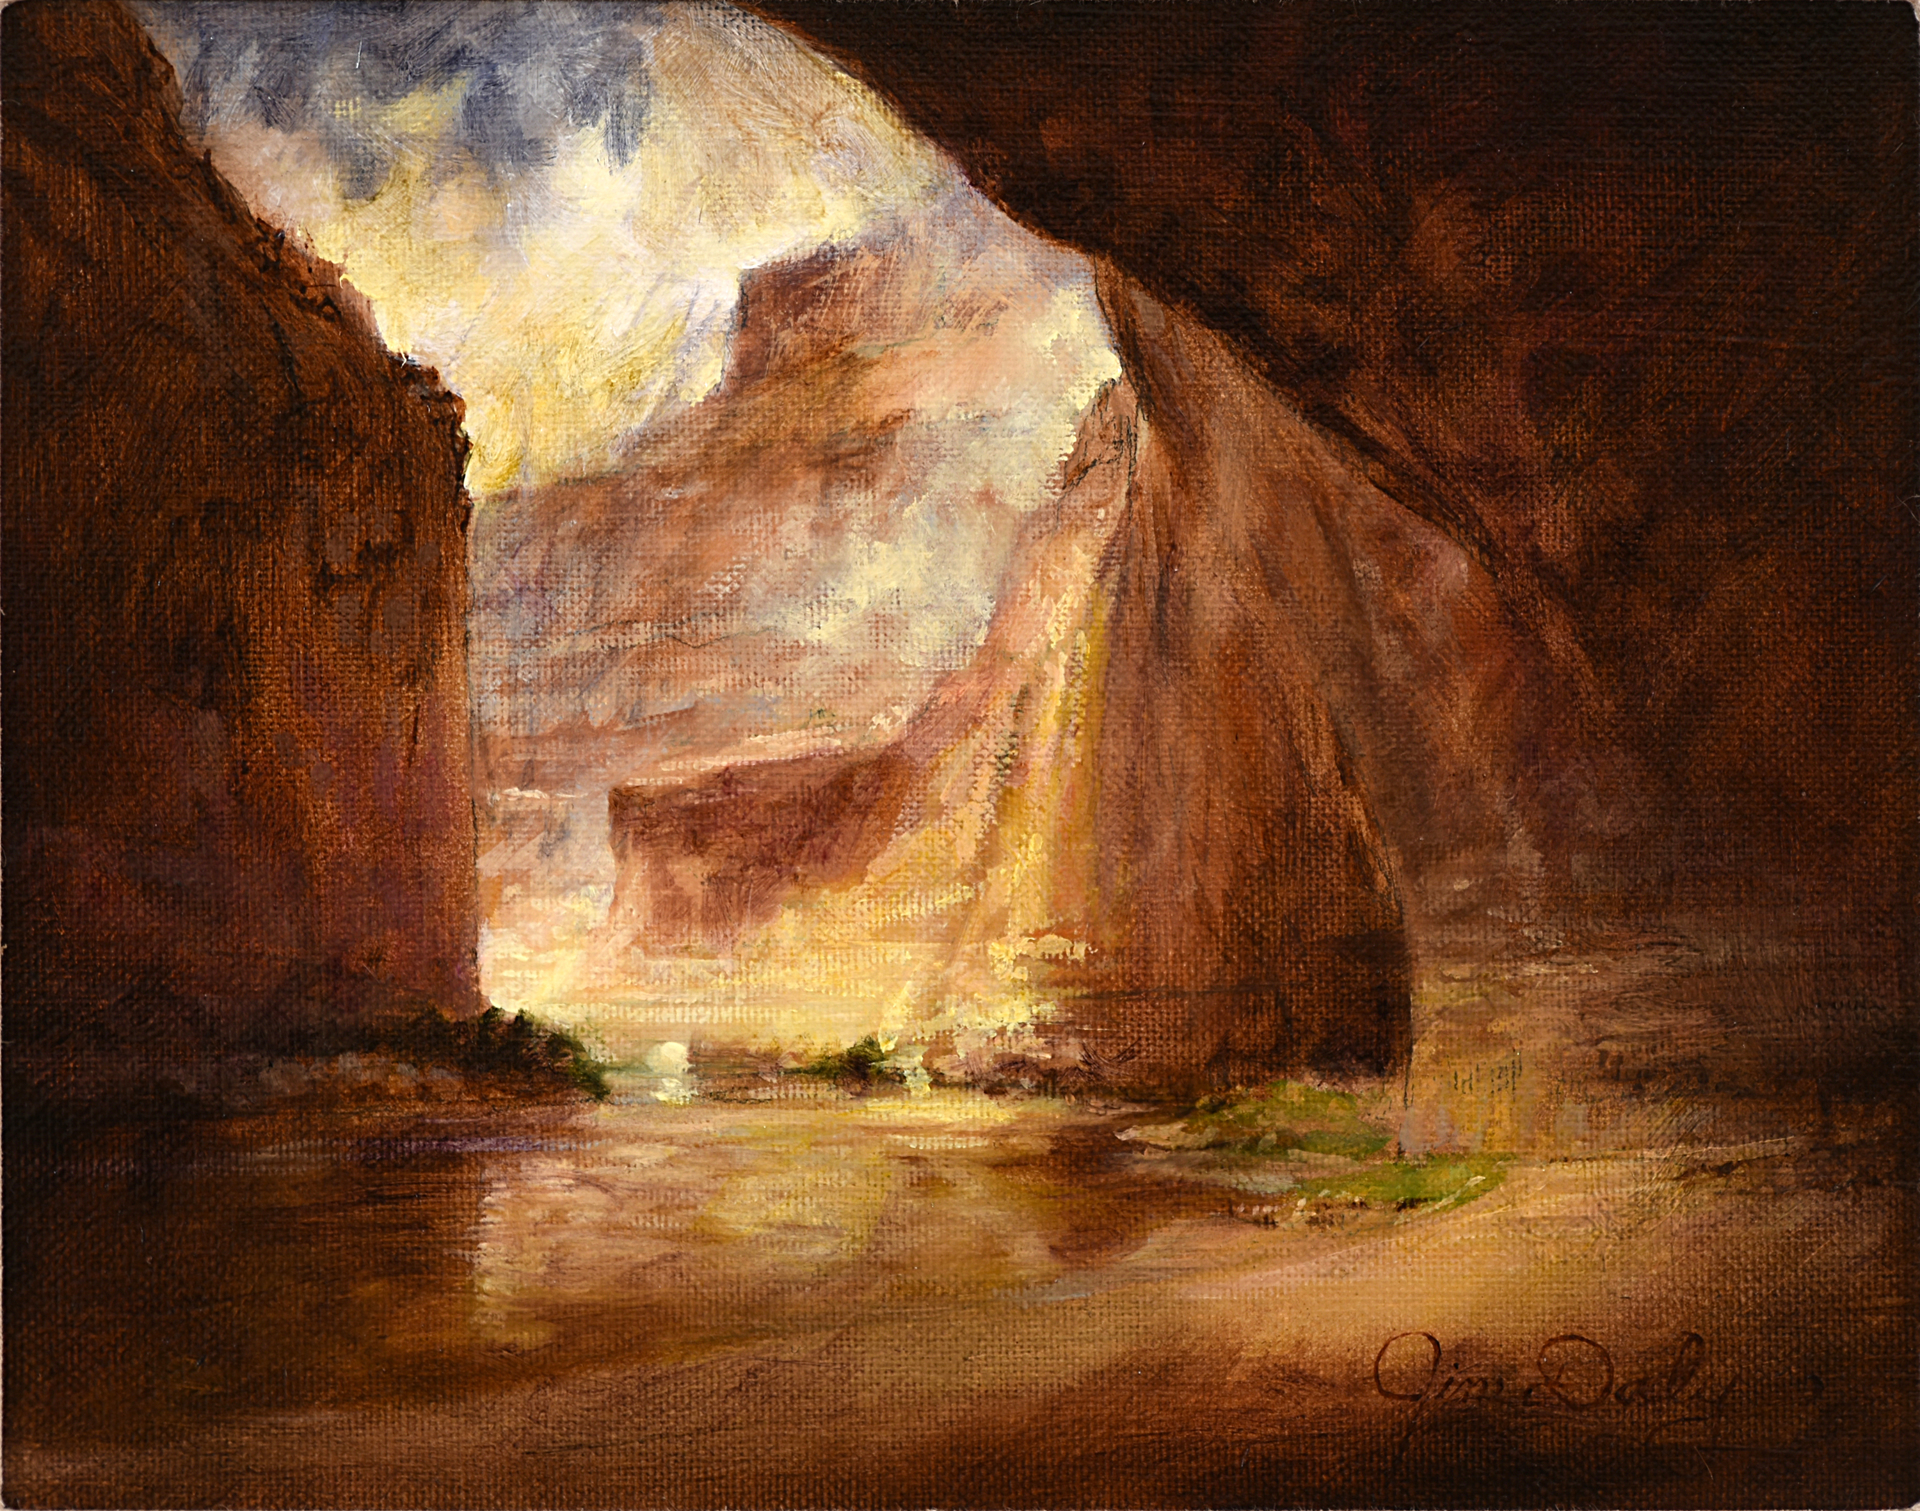 Red Wall Cavern by Jim Daly